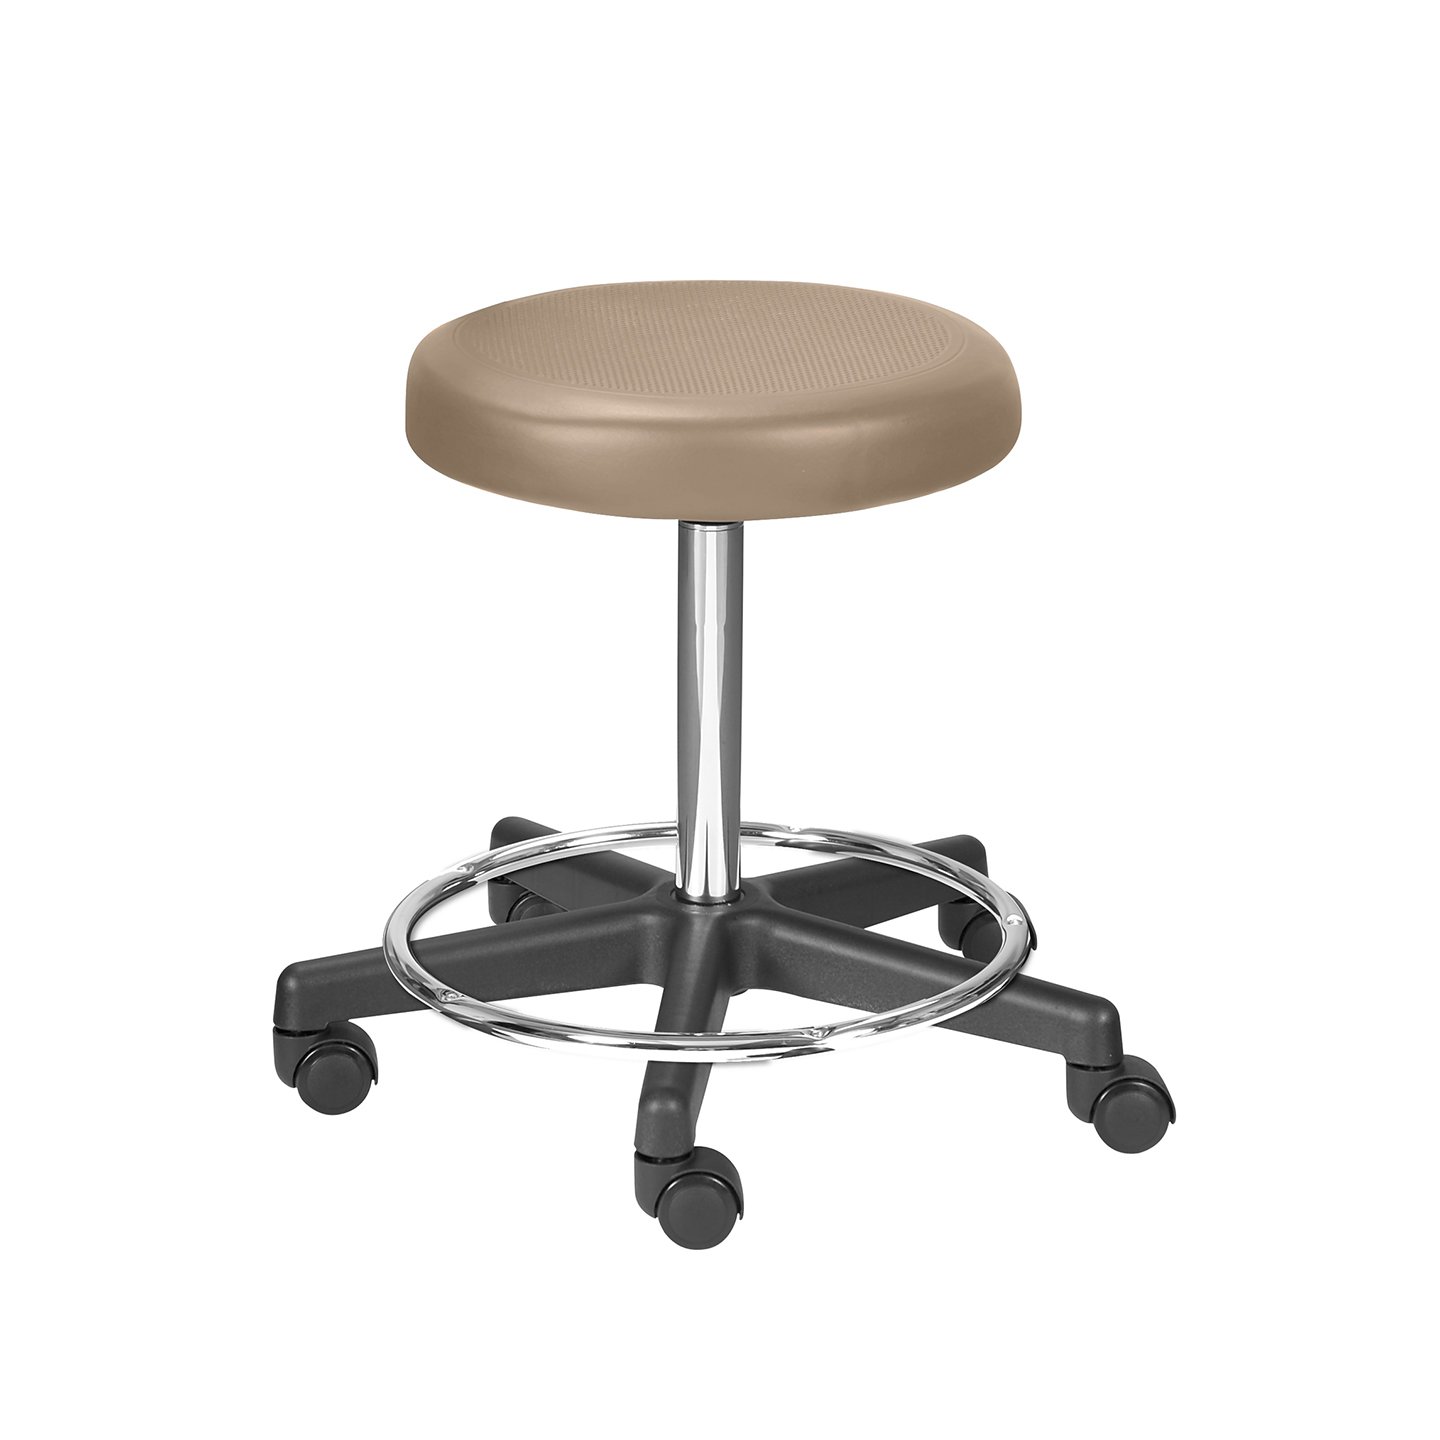 Haworth Exam stool in brown seating and swivel base